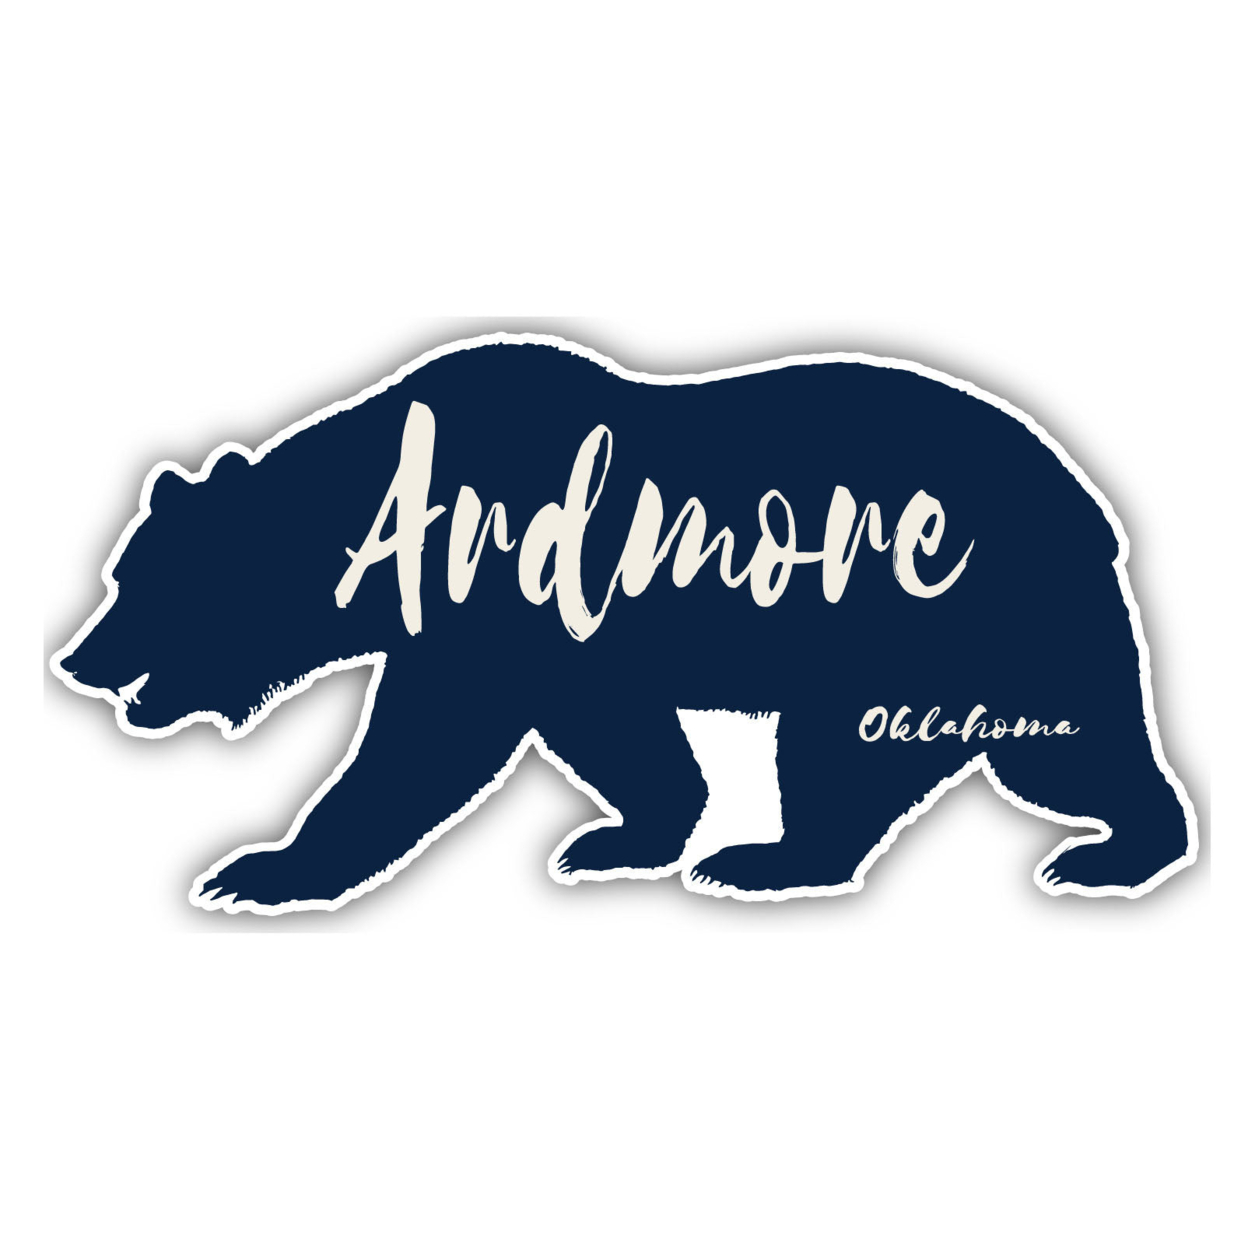 Ardmore Oklahoma Souvenir Decorative Stickers (Choose Theme And Size) - 4-Pack, 2-Inch, Adventures Awaits